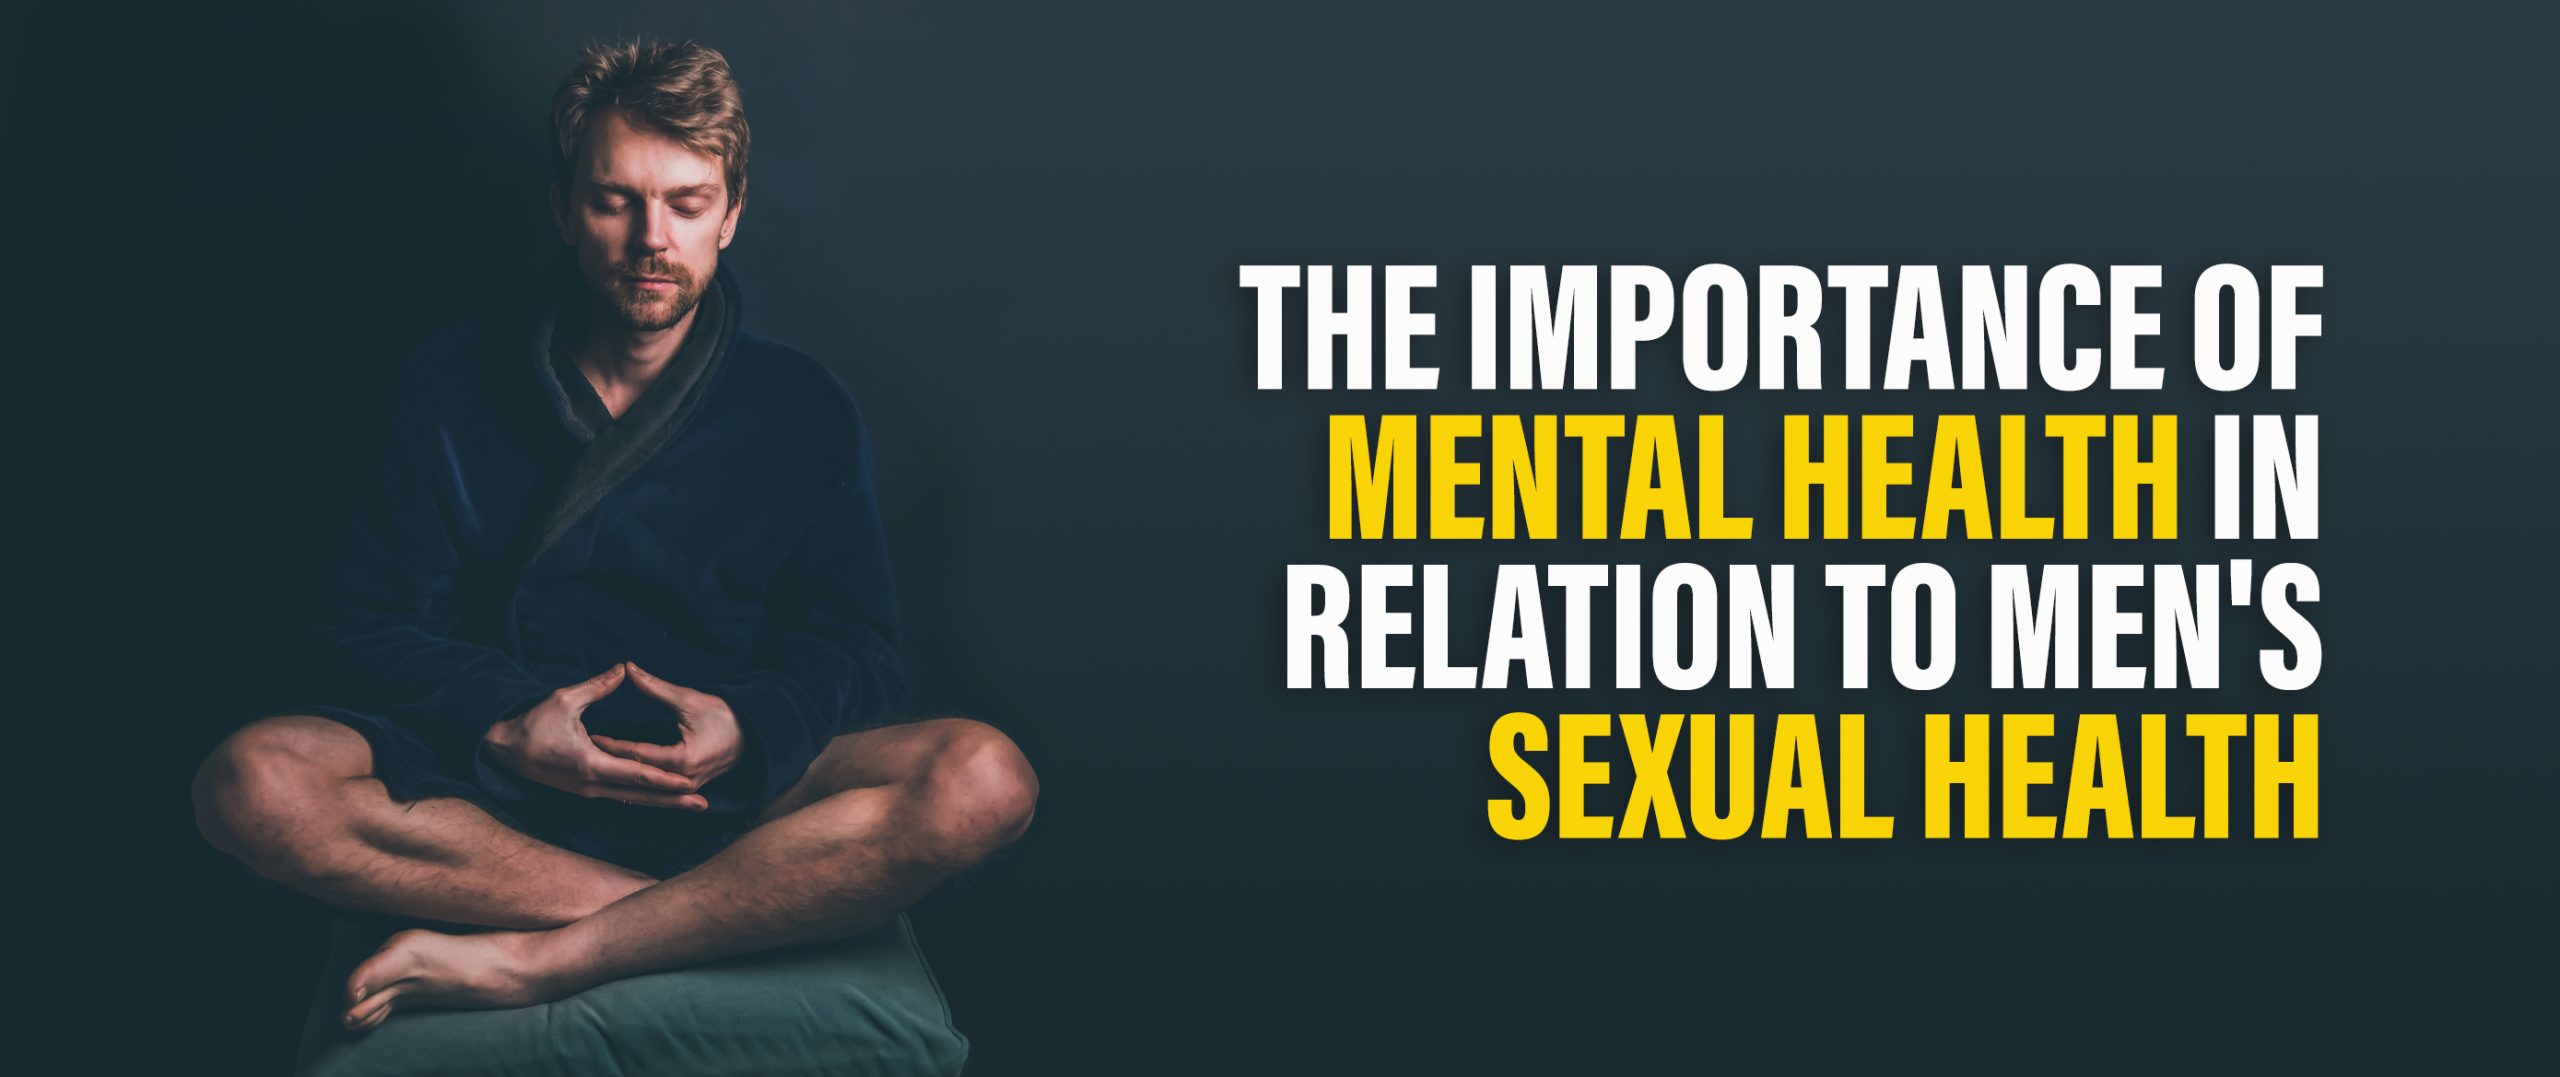 The Importance Of Mental Health In Relation To Men’s Sexual Health